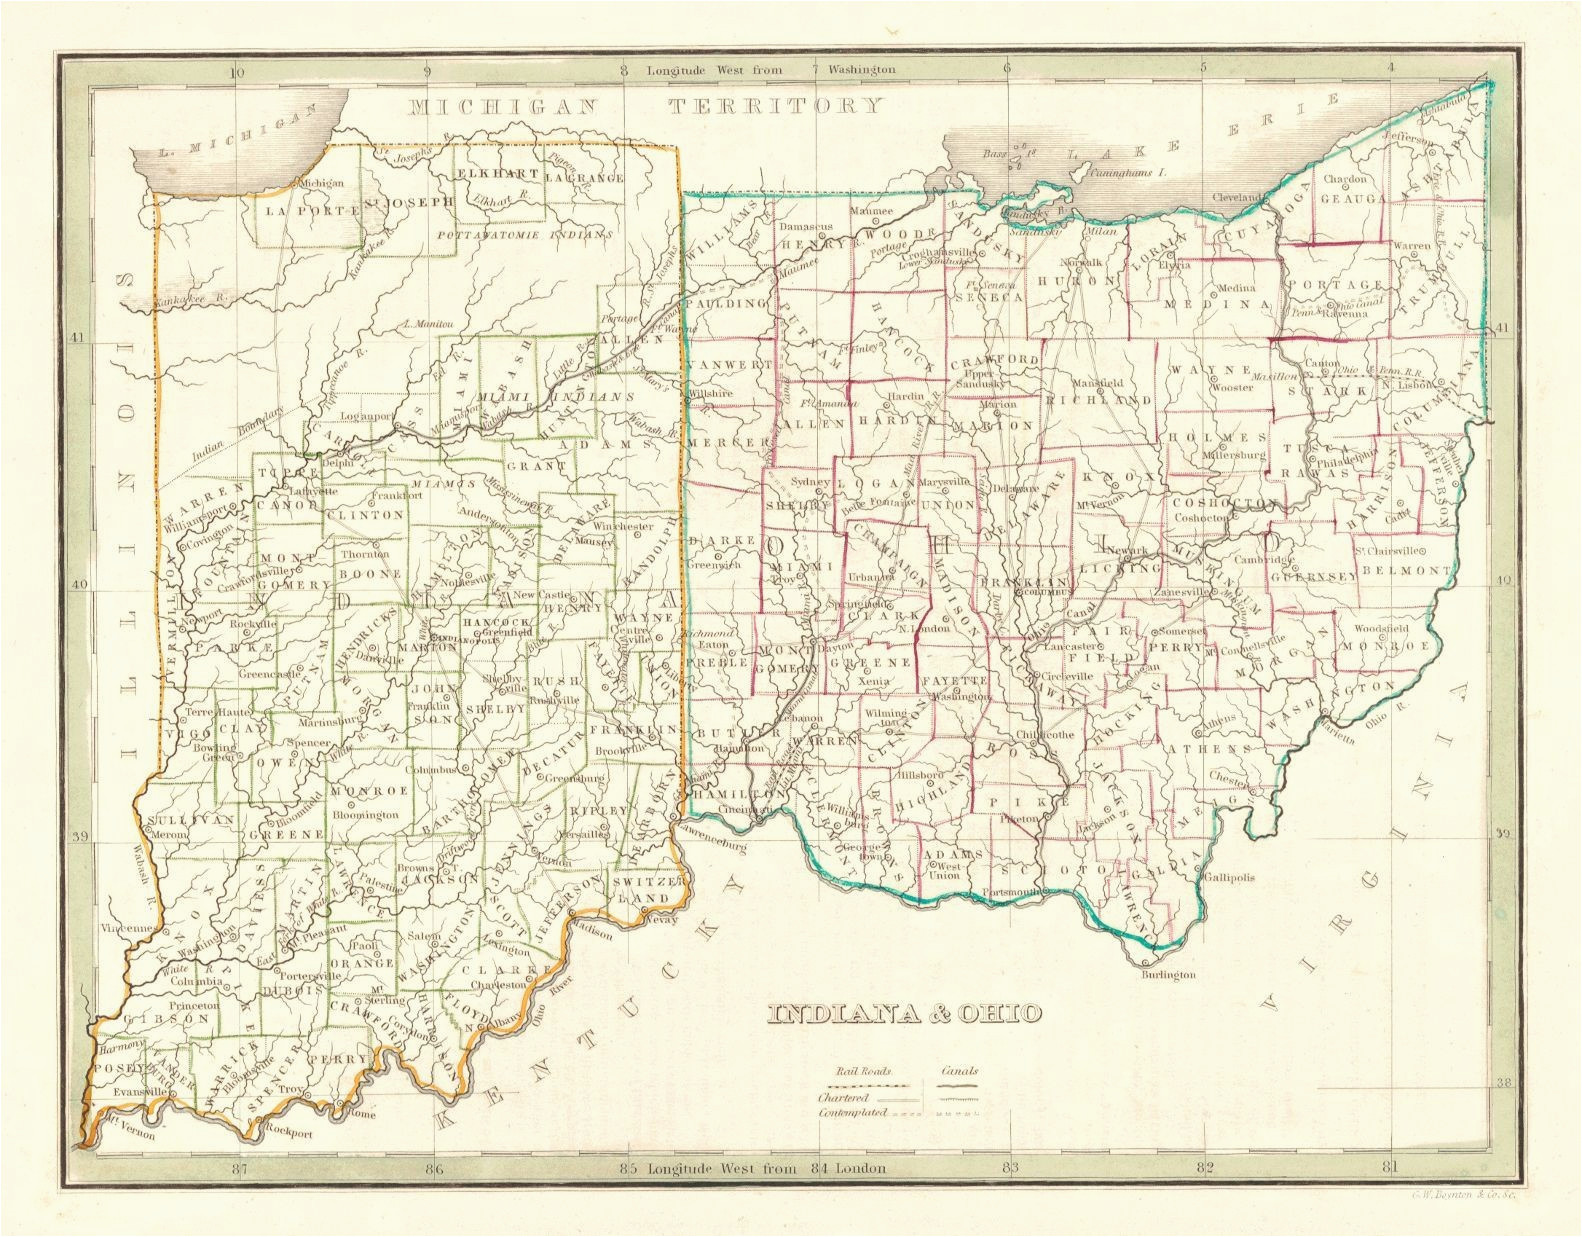 bloomington map lovely us counties map line best indiana ohio 1835